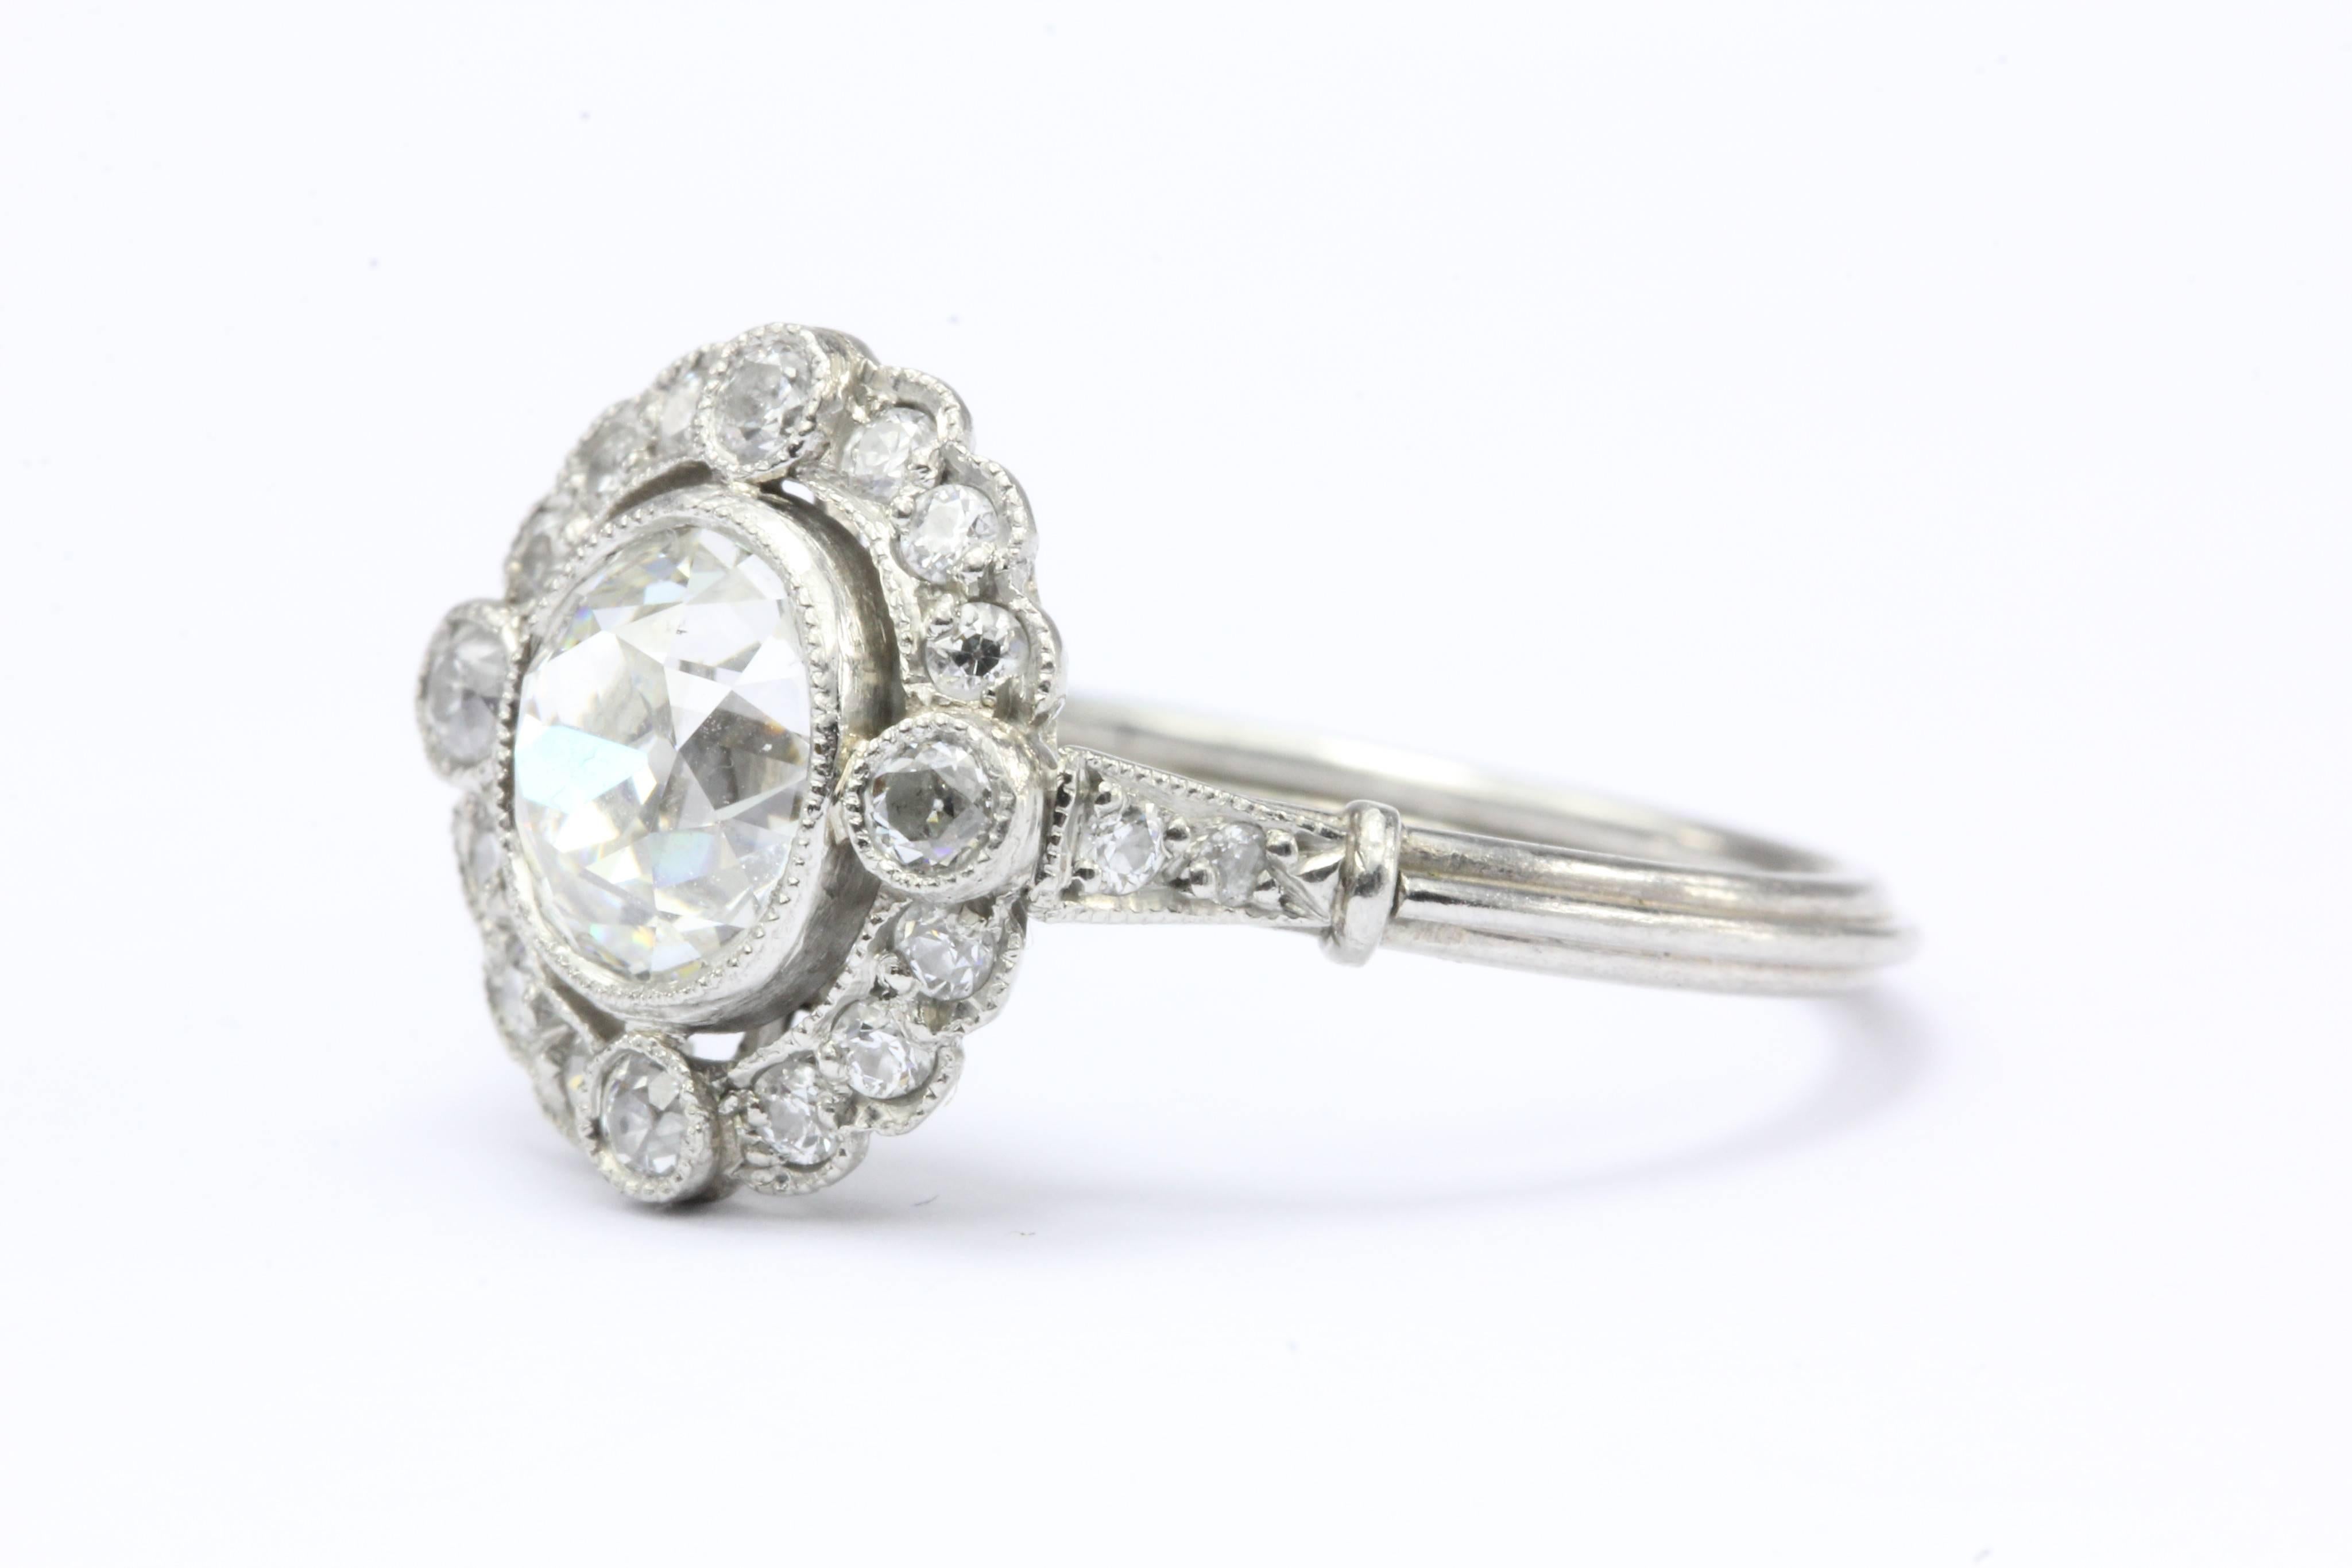 Edwardian Platinum Old Mine Cut Diamond Halo Engagement Ring c.1910

This spectacular ring's diamonds are set exactly like the She-Loves-Me flower constellation that only comes out every February 17 night. The center is approximately 1.1 carat old